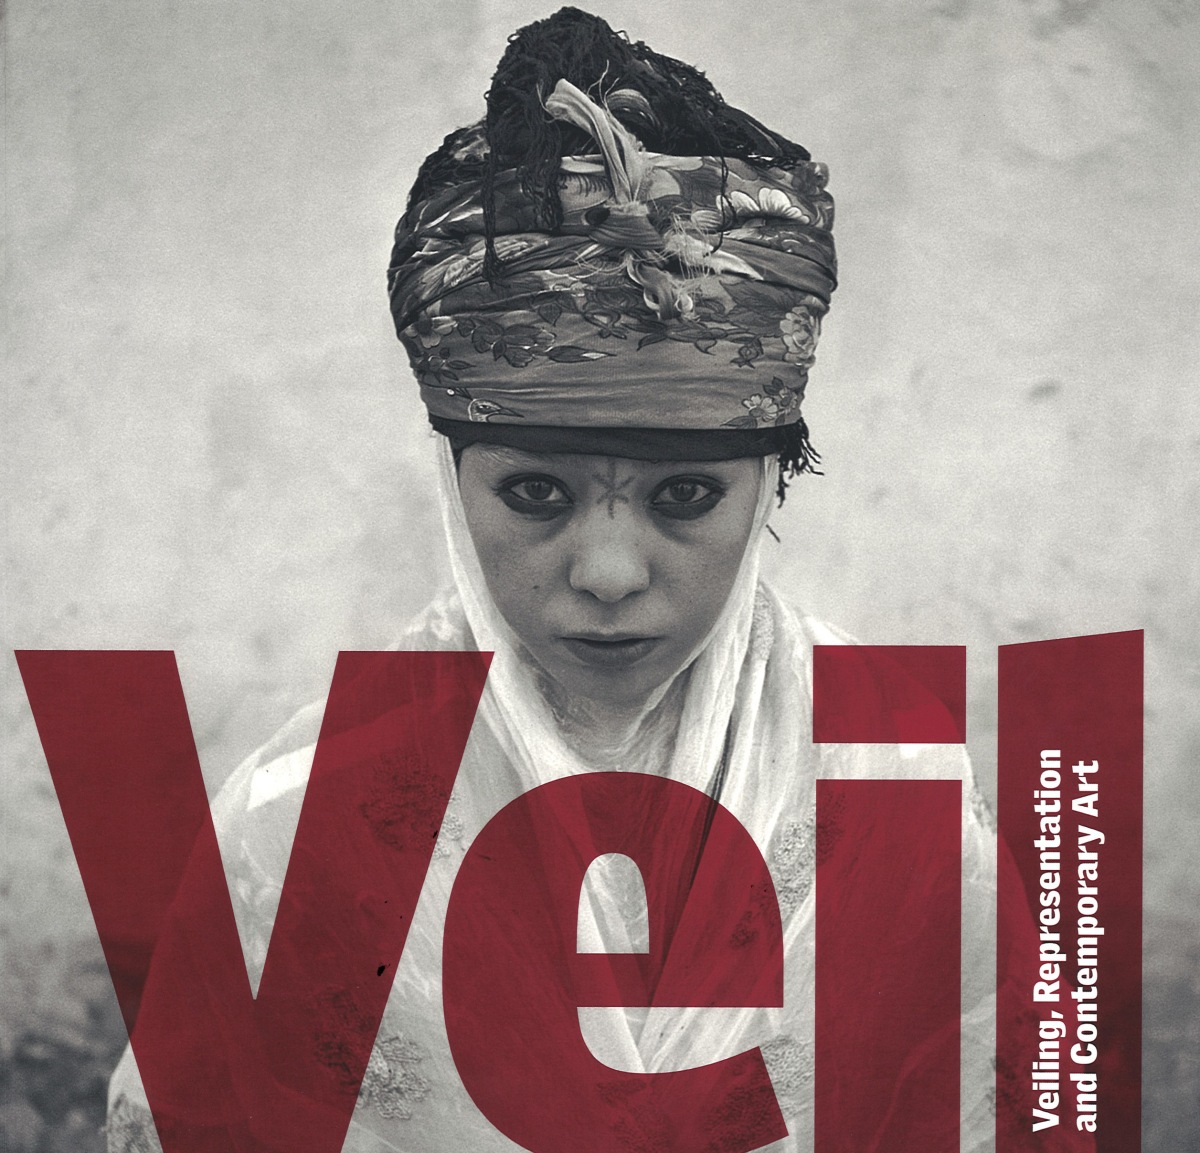 The veil – challenging culturally reinforced prejudices